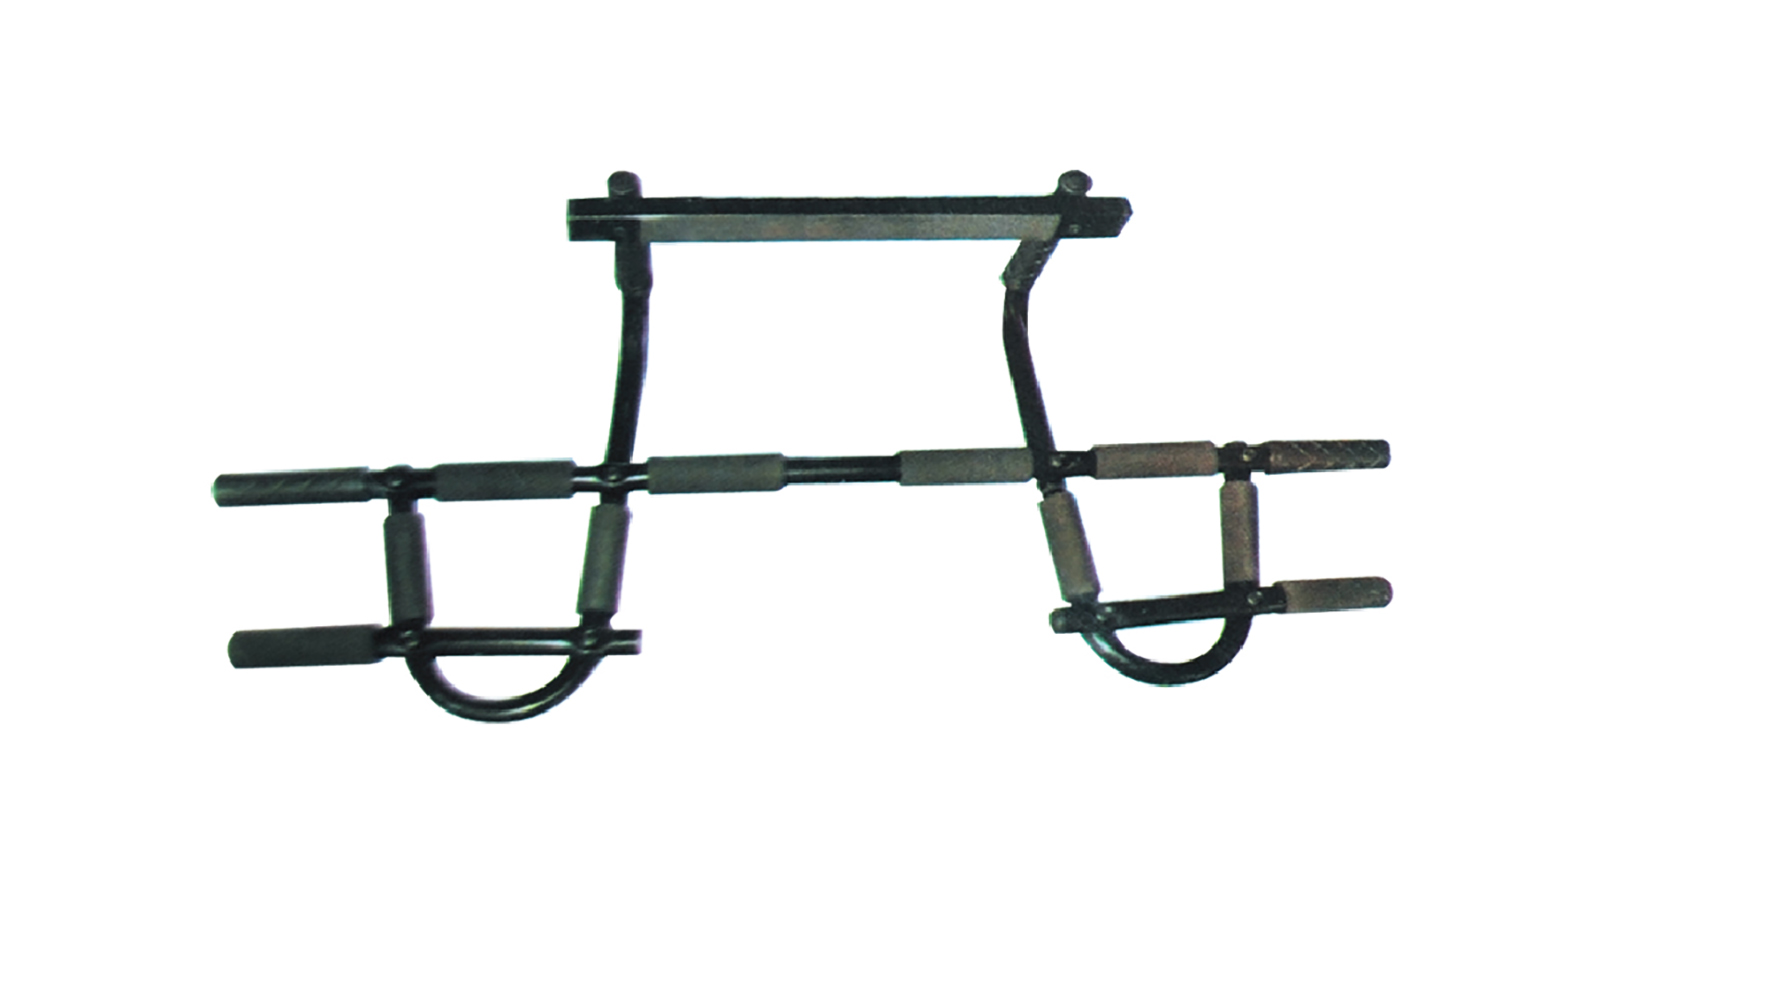 IRSB0909 pull-up rack